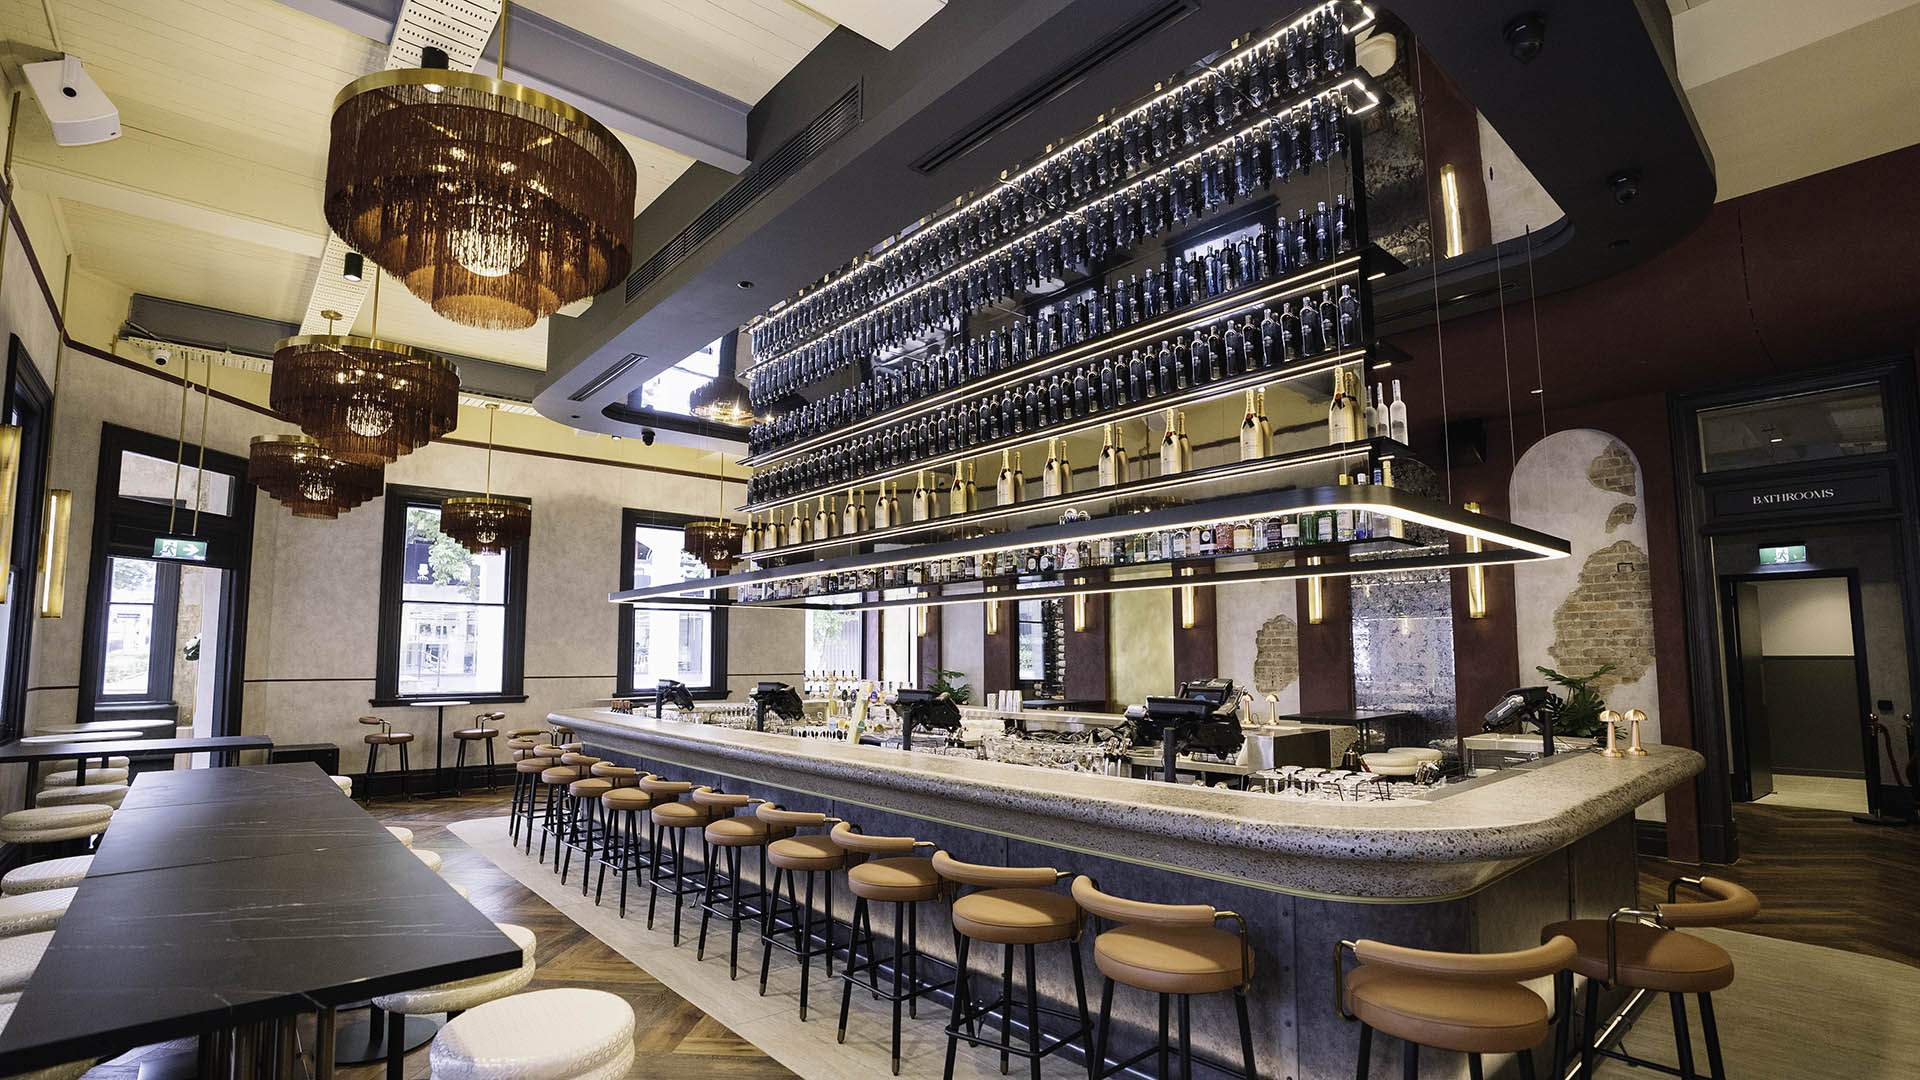 Now Open: GPO Is Finally Back with Three Venues in One After a Massive $9-Million Makeover